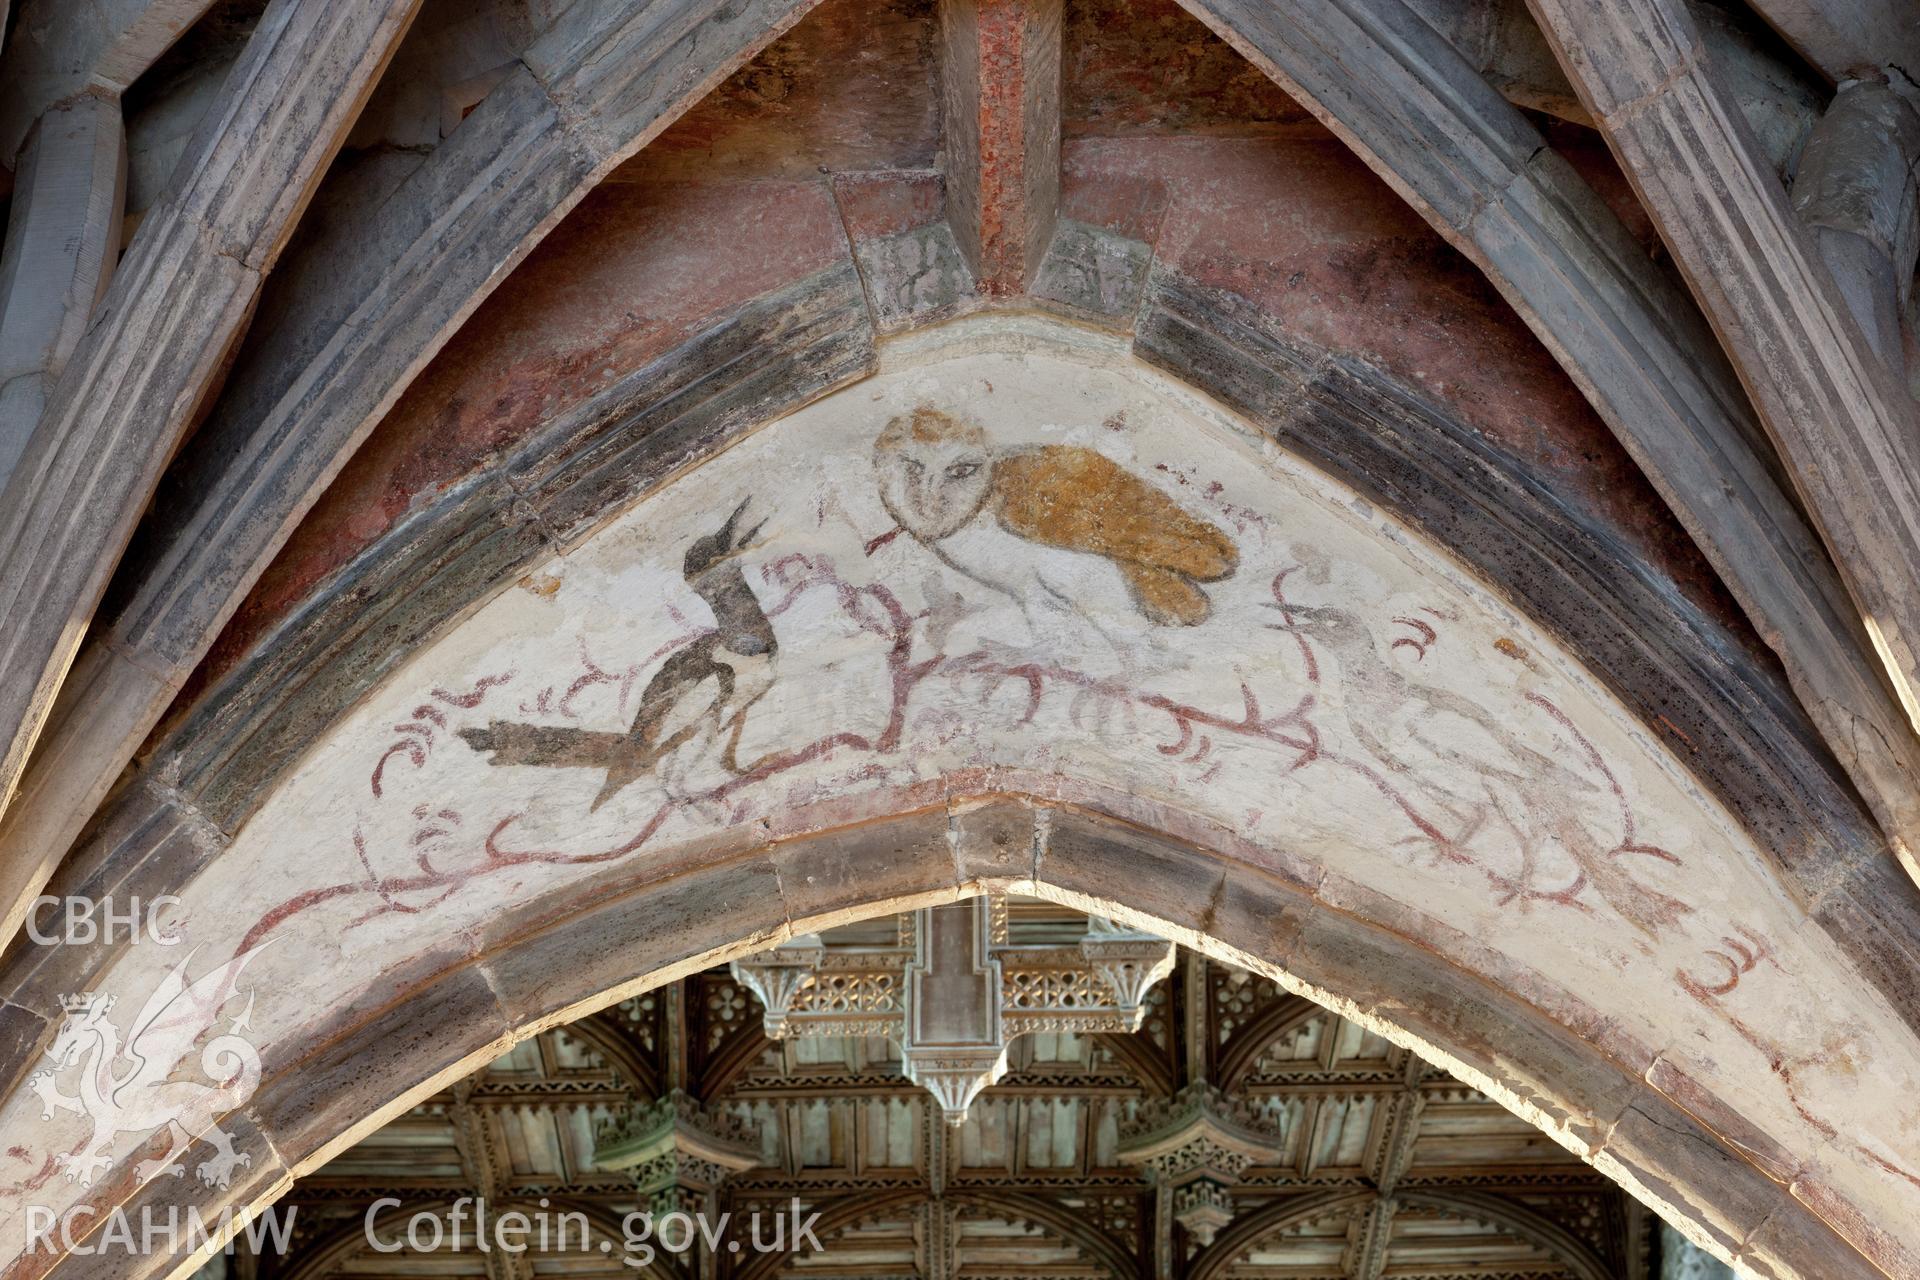 Owl decoration on vaulting, detail